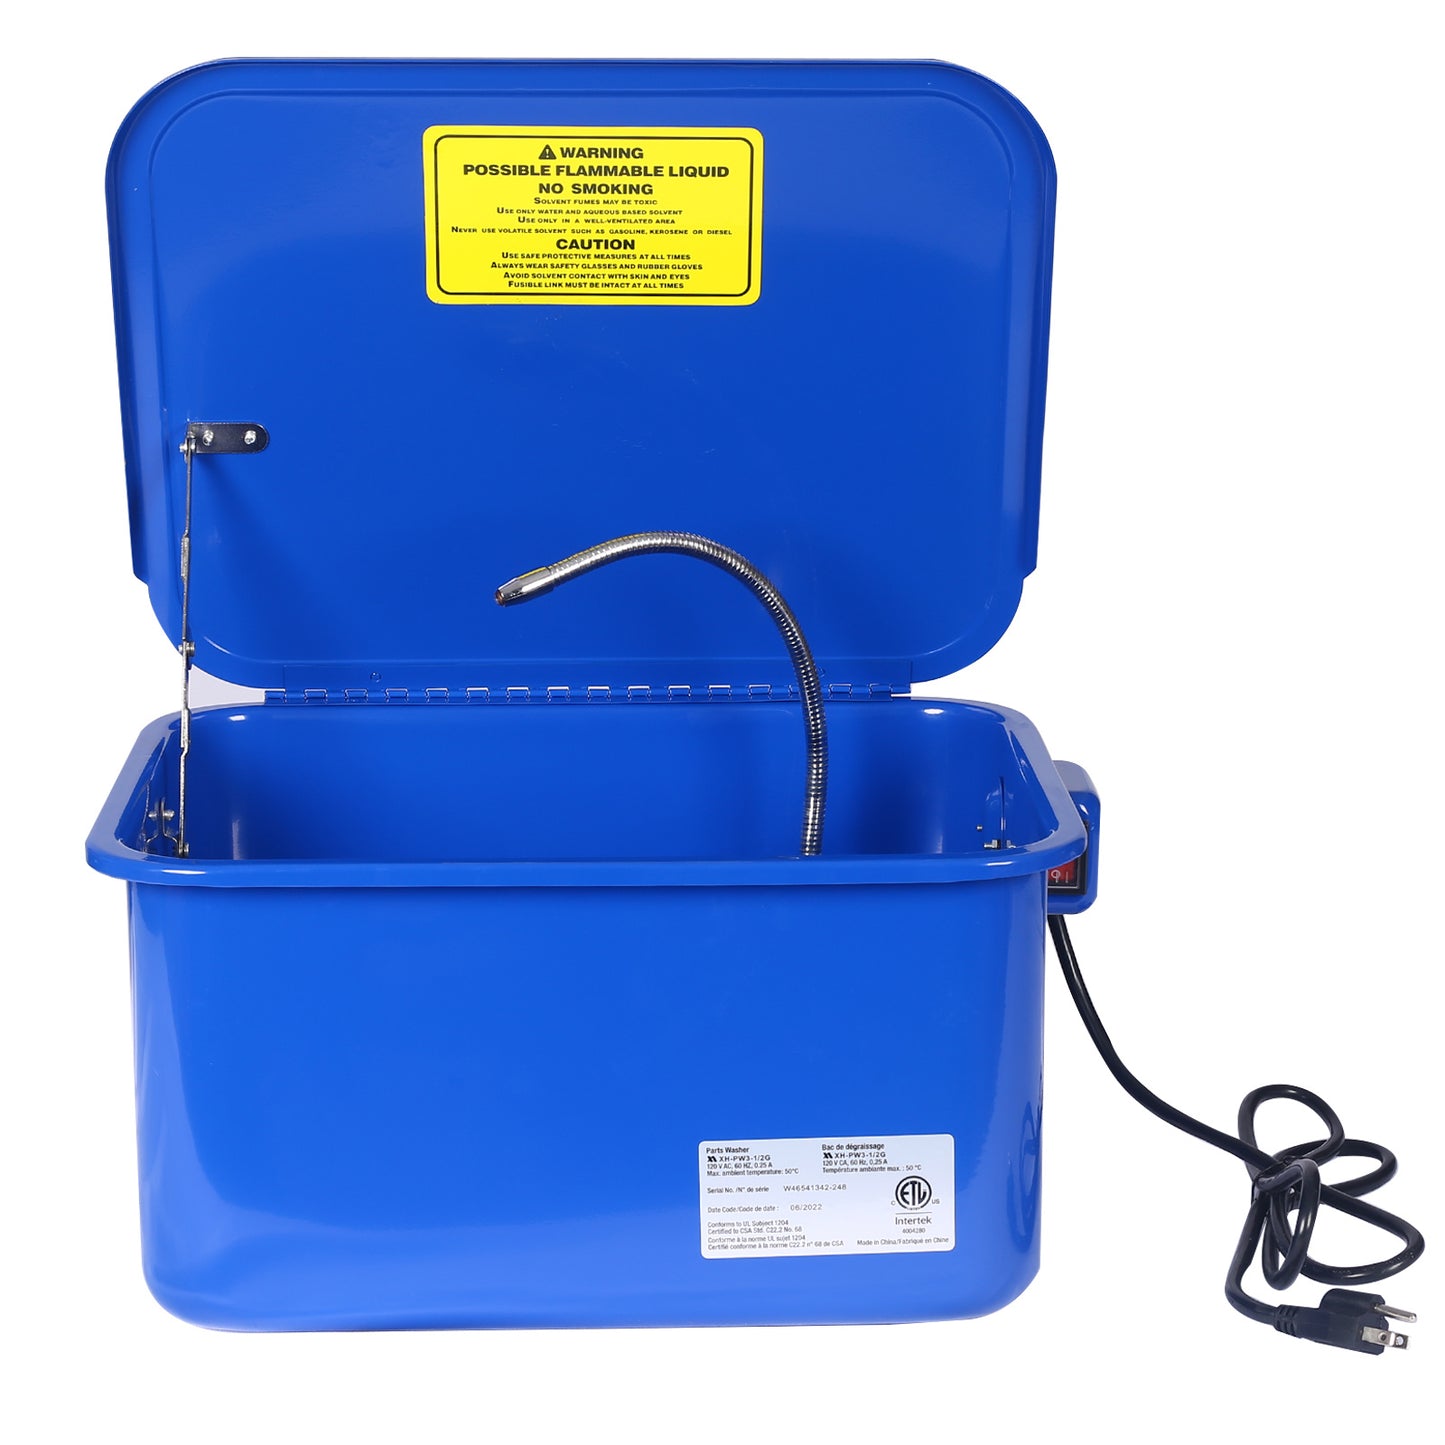 Cabinet parts washer with 110v pump